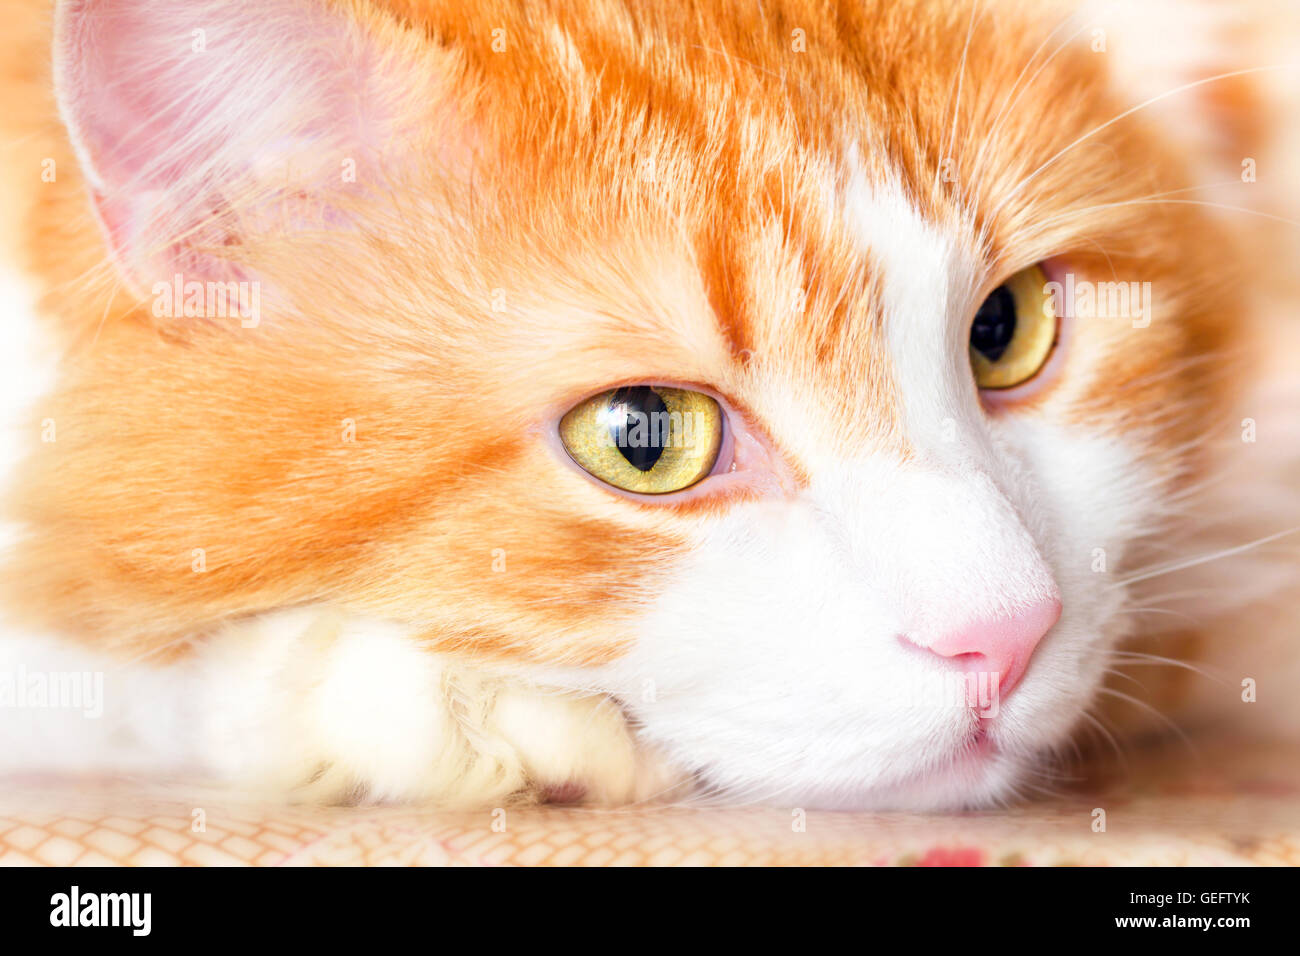 Nice pensive portrait of adult red cat Stock Photo